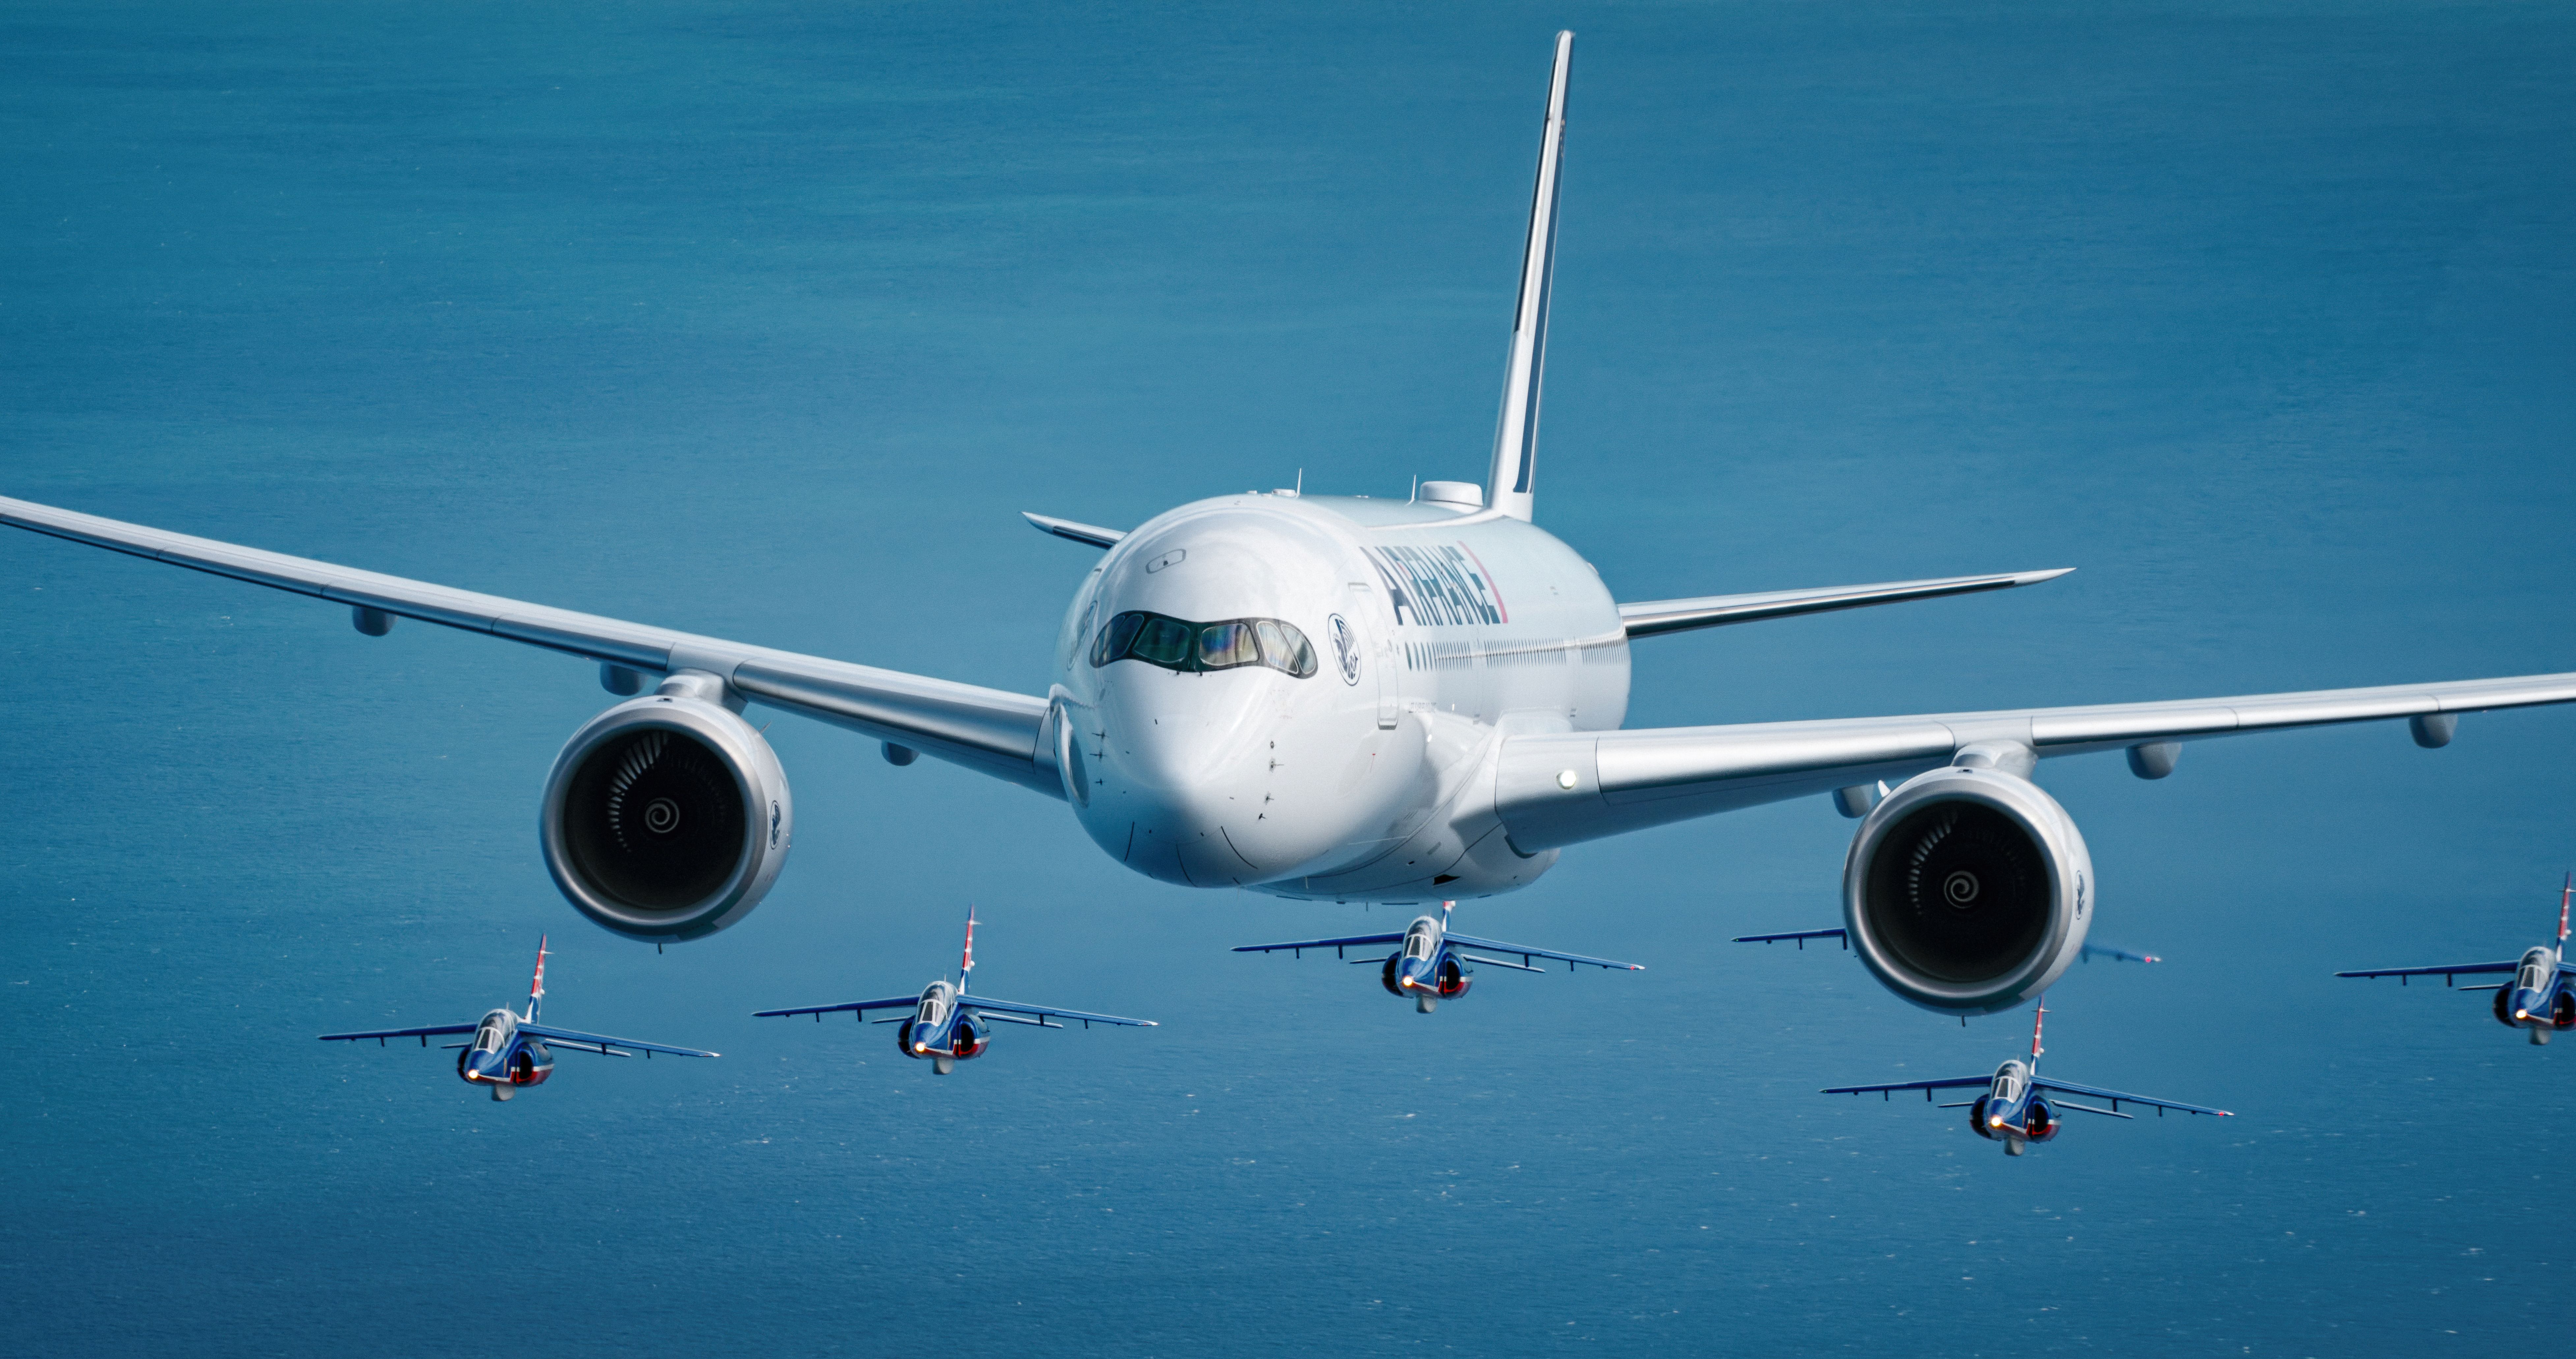 An Air France's Airbus A350 being followed by several fighter jets.